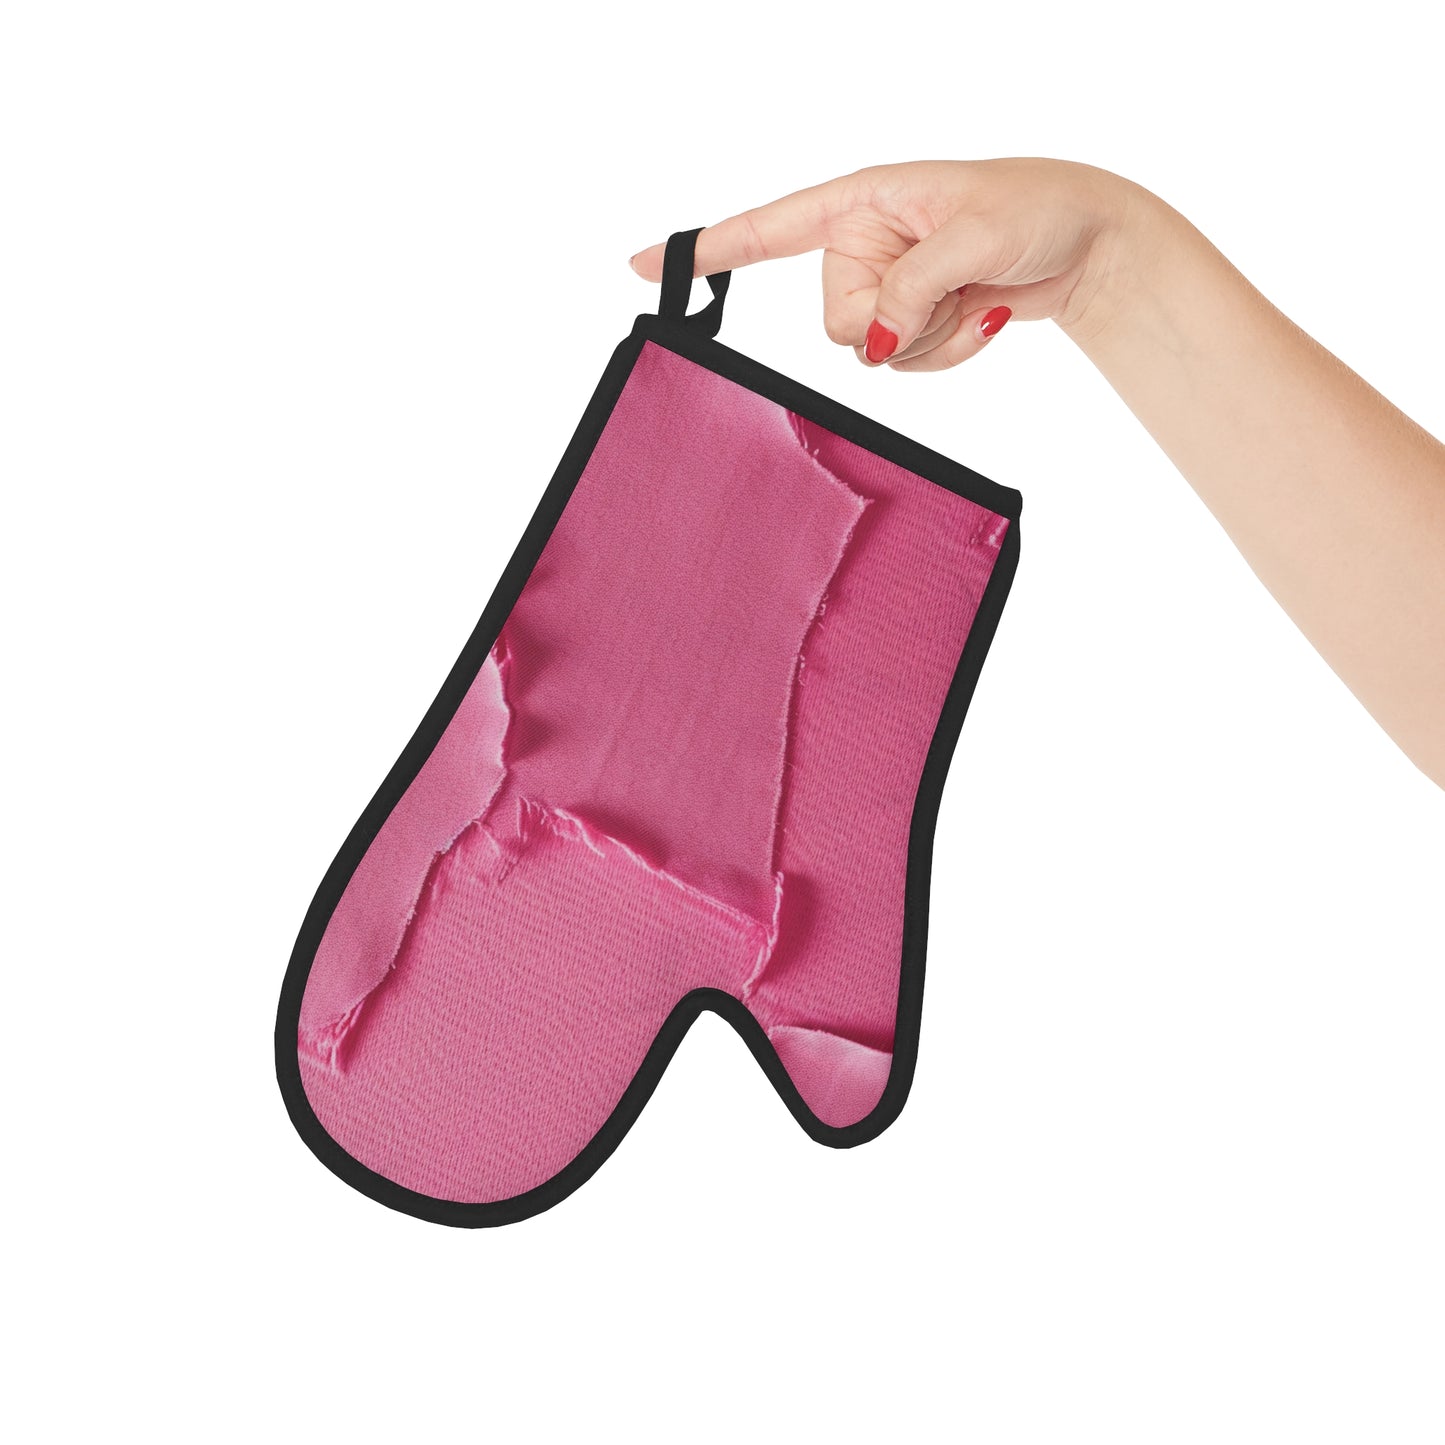 Distressed Neon Pink: Edgy, Ripped Denim-Inspired Doll Fabric - Oven Glove